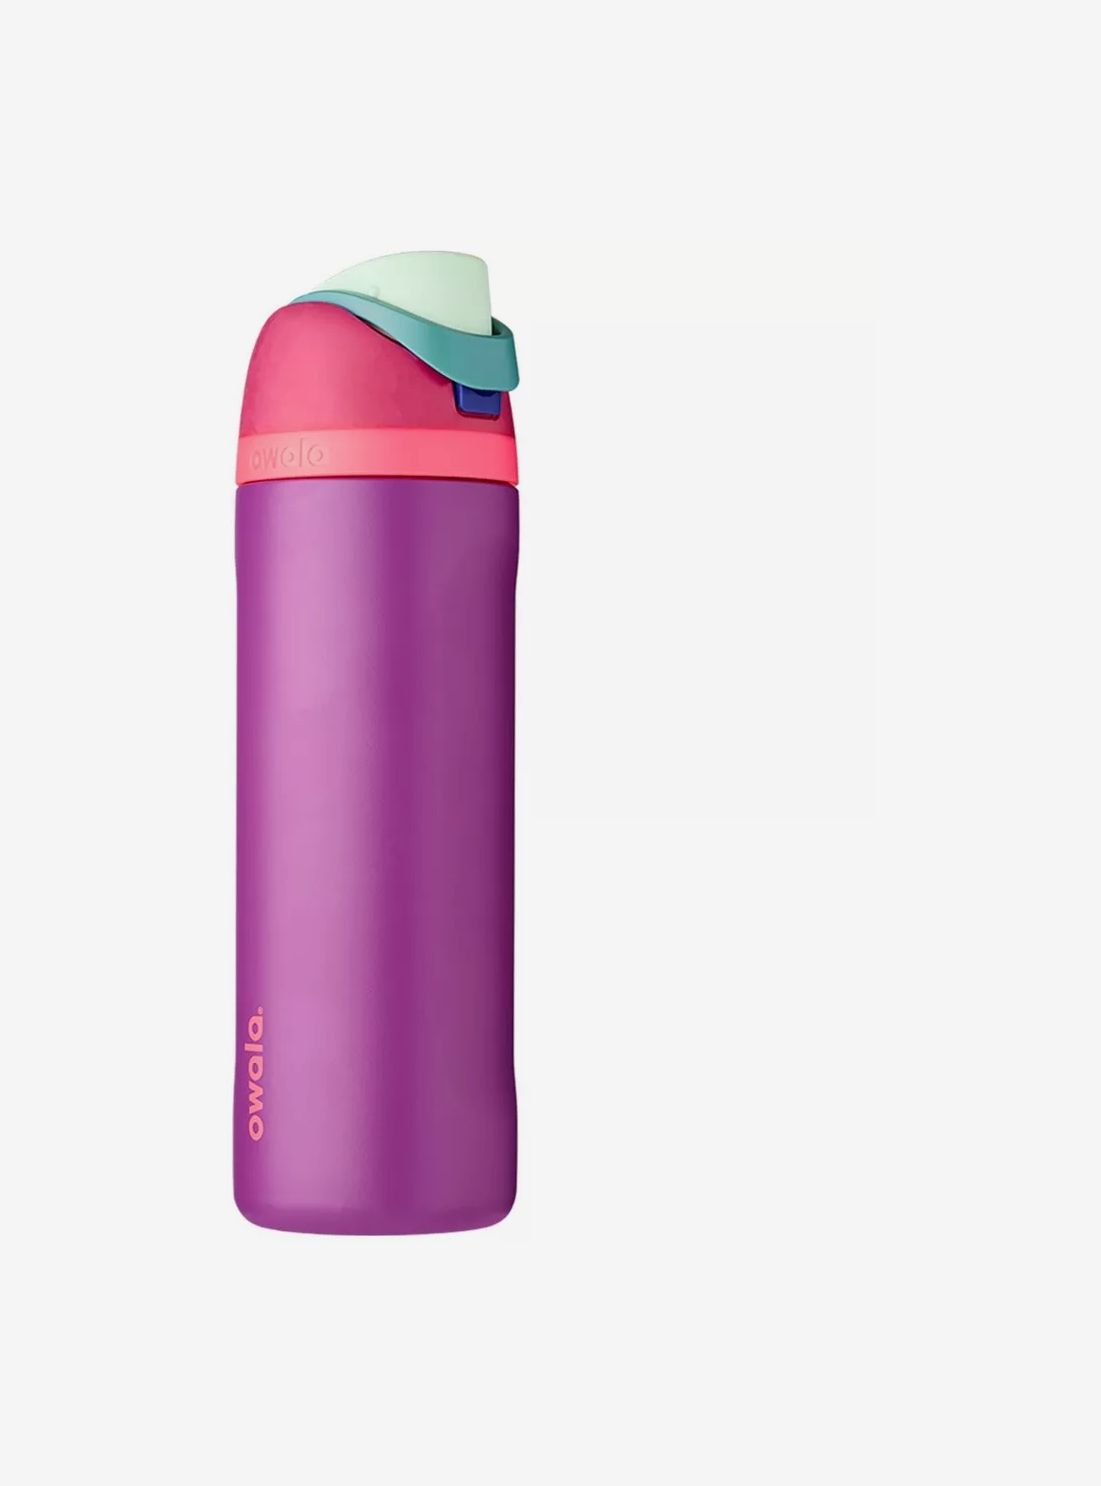 The Coldest Limitless Just Might Be the Ultimate Water Bottle